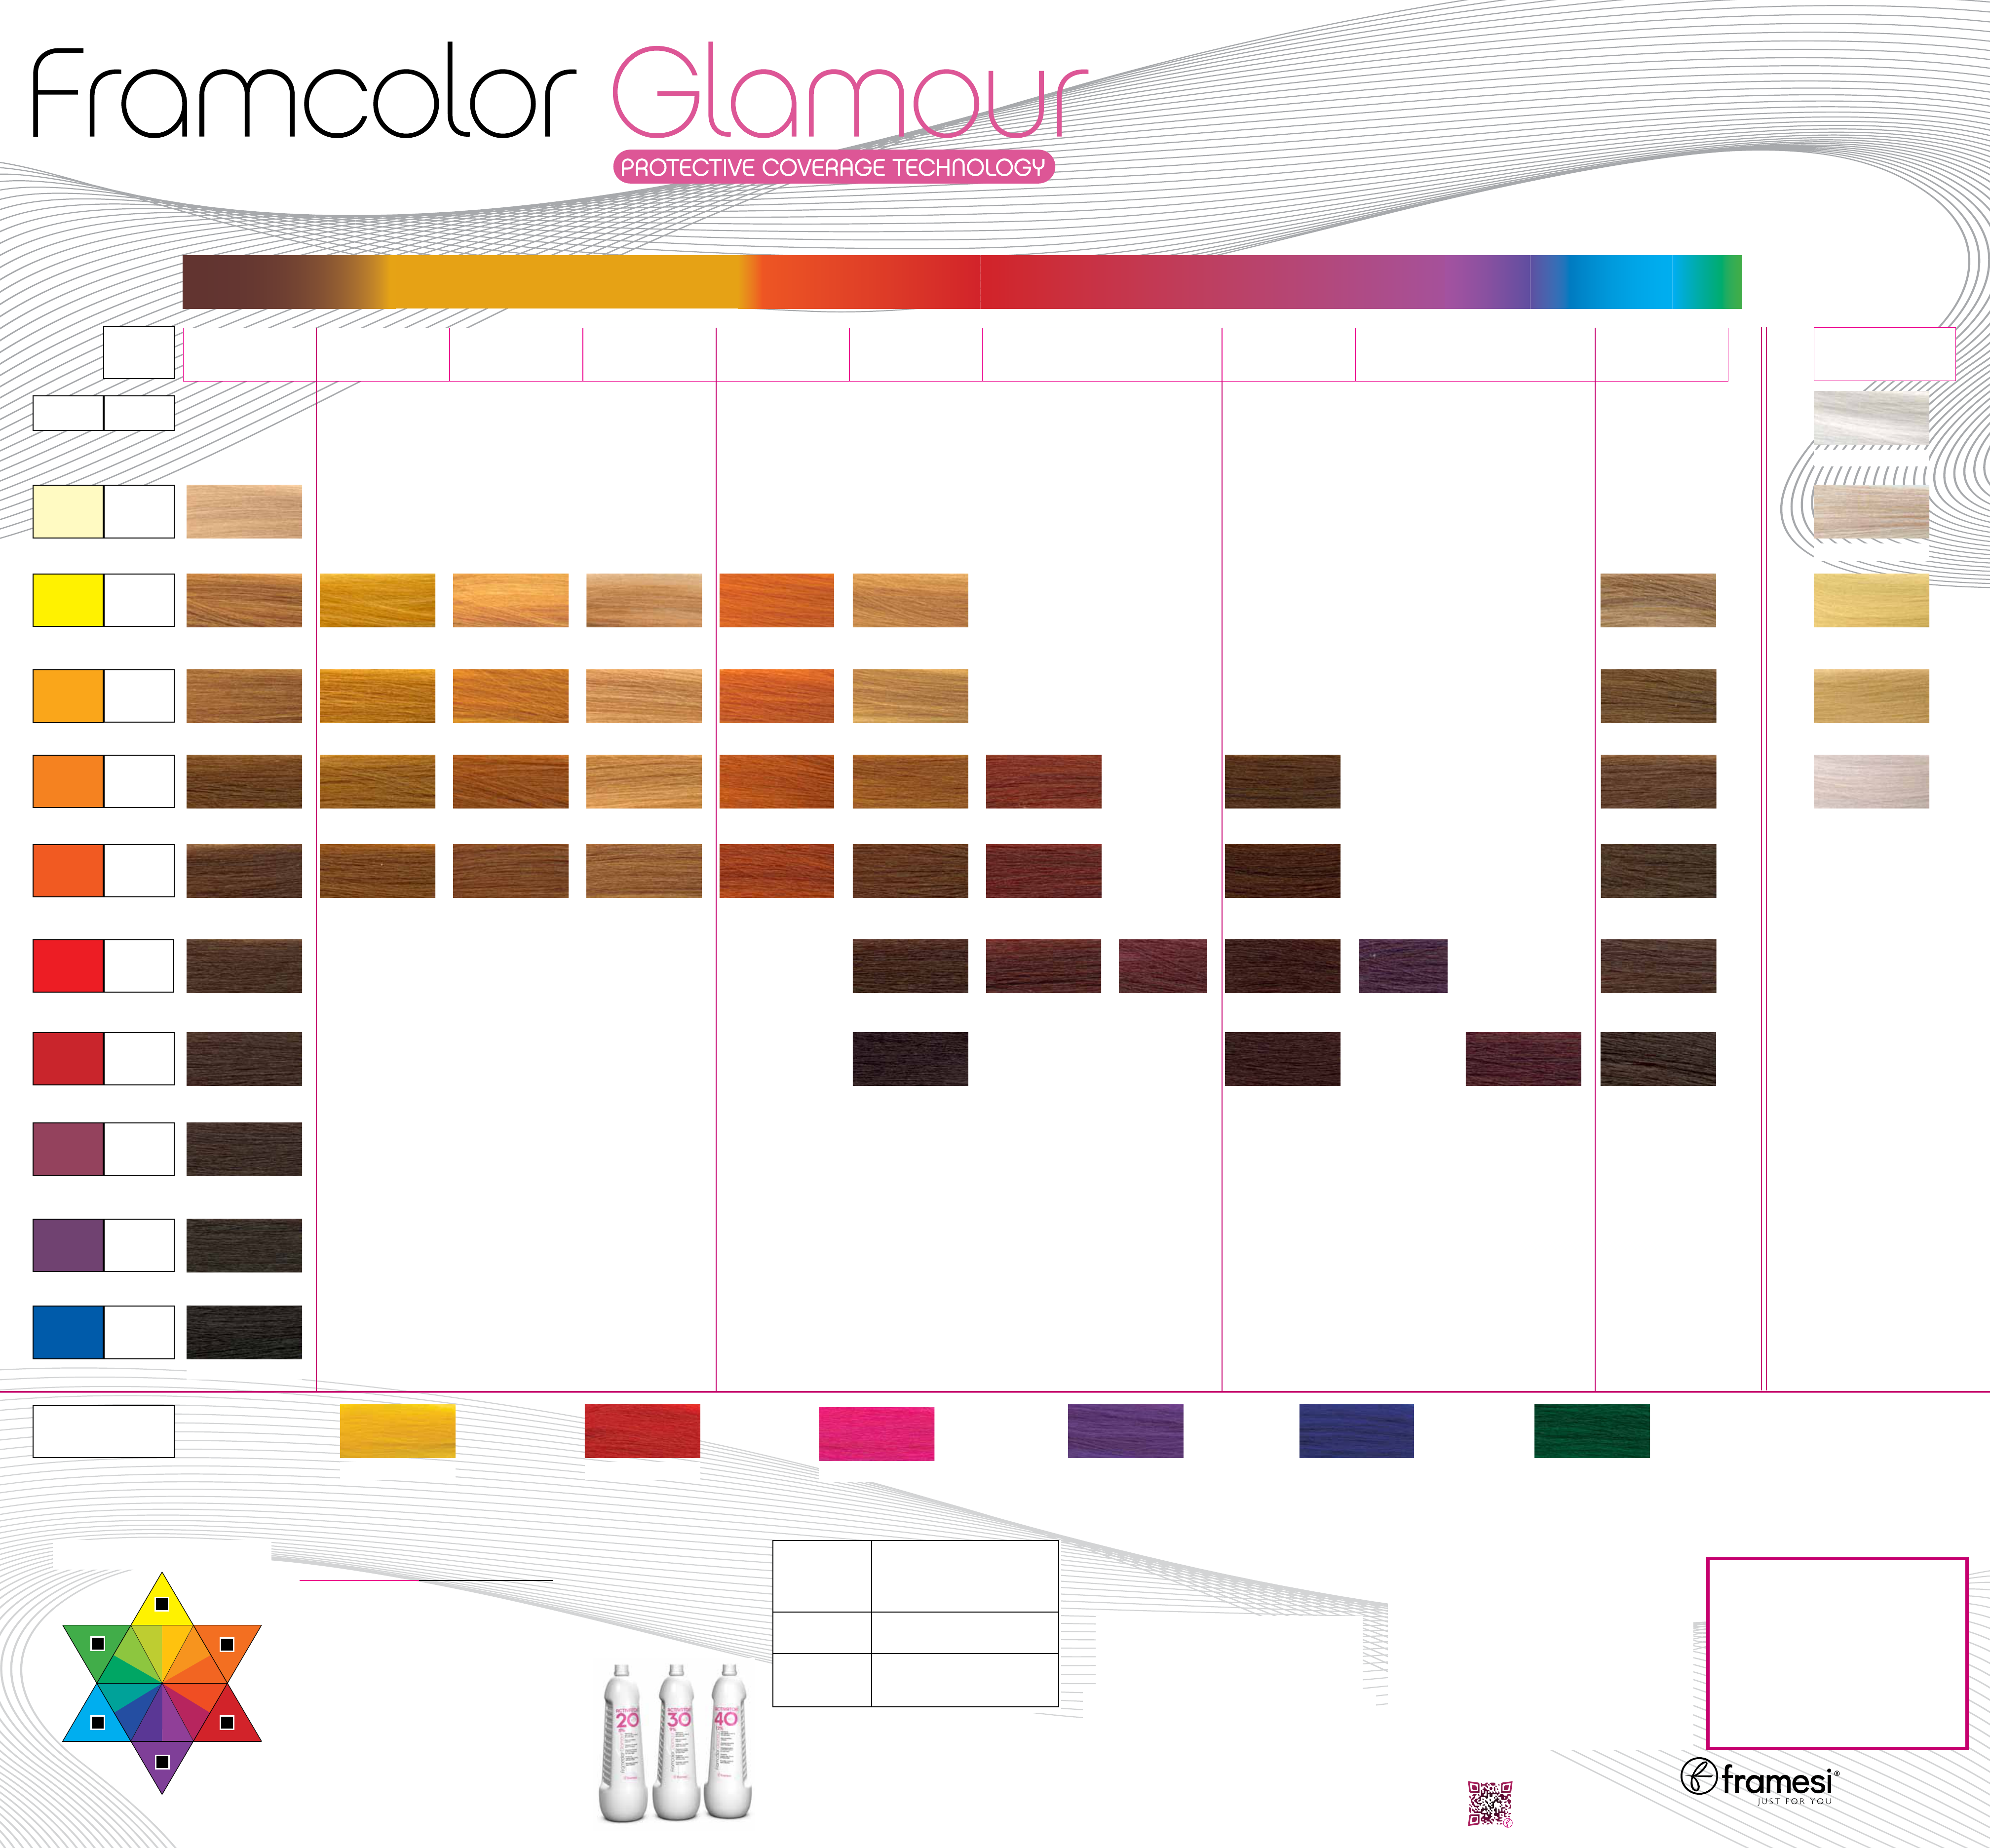 Framcolor Glamour Hair Color Wall Chart